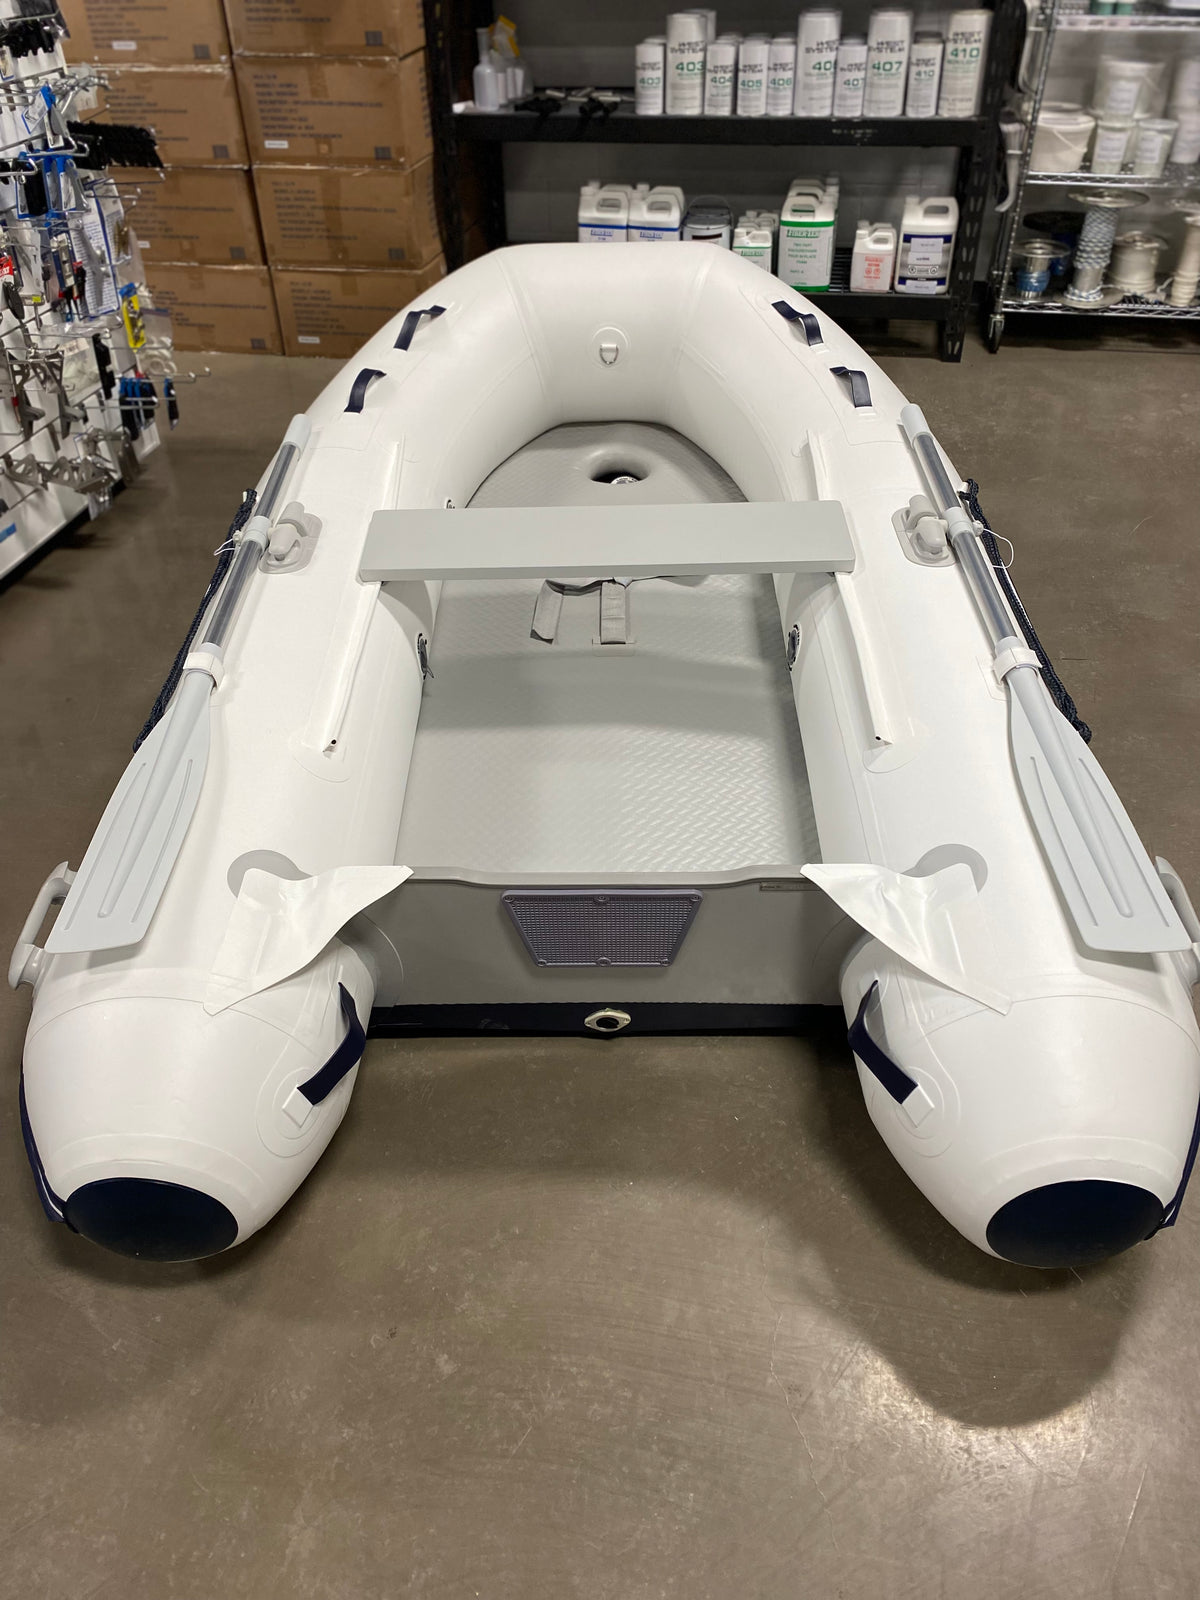 Quicksilver AA250032N Airdeck 250, 2.49m Inflatable Boat w